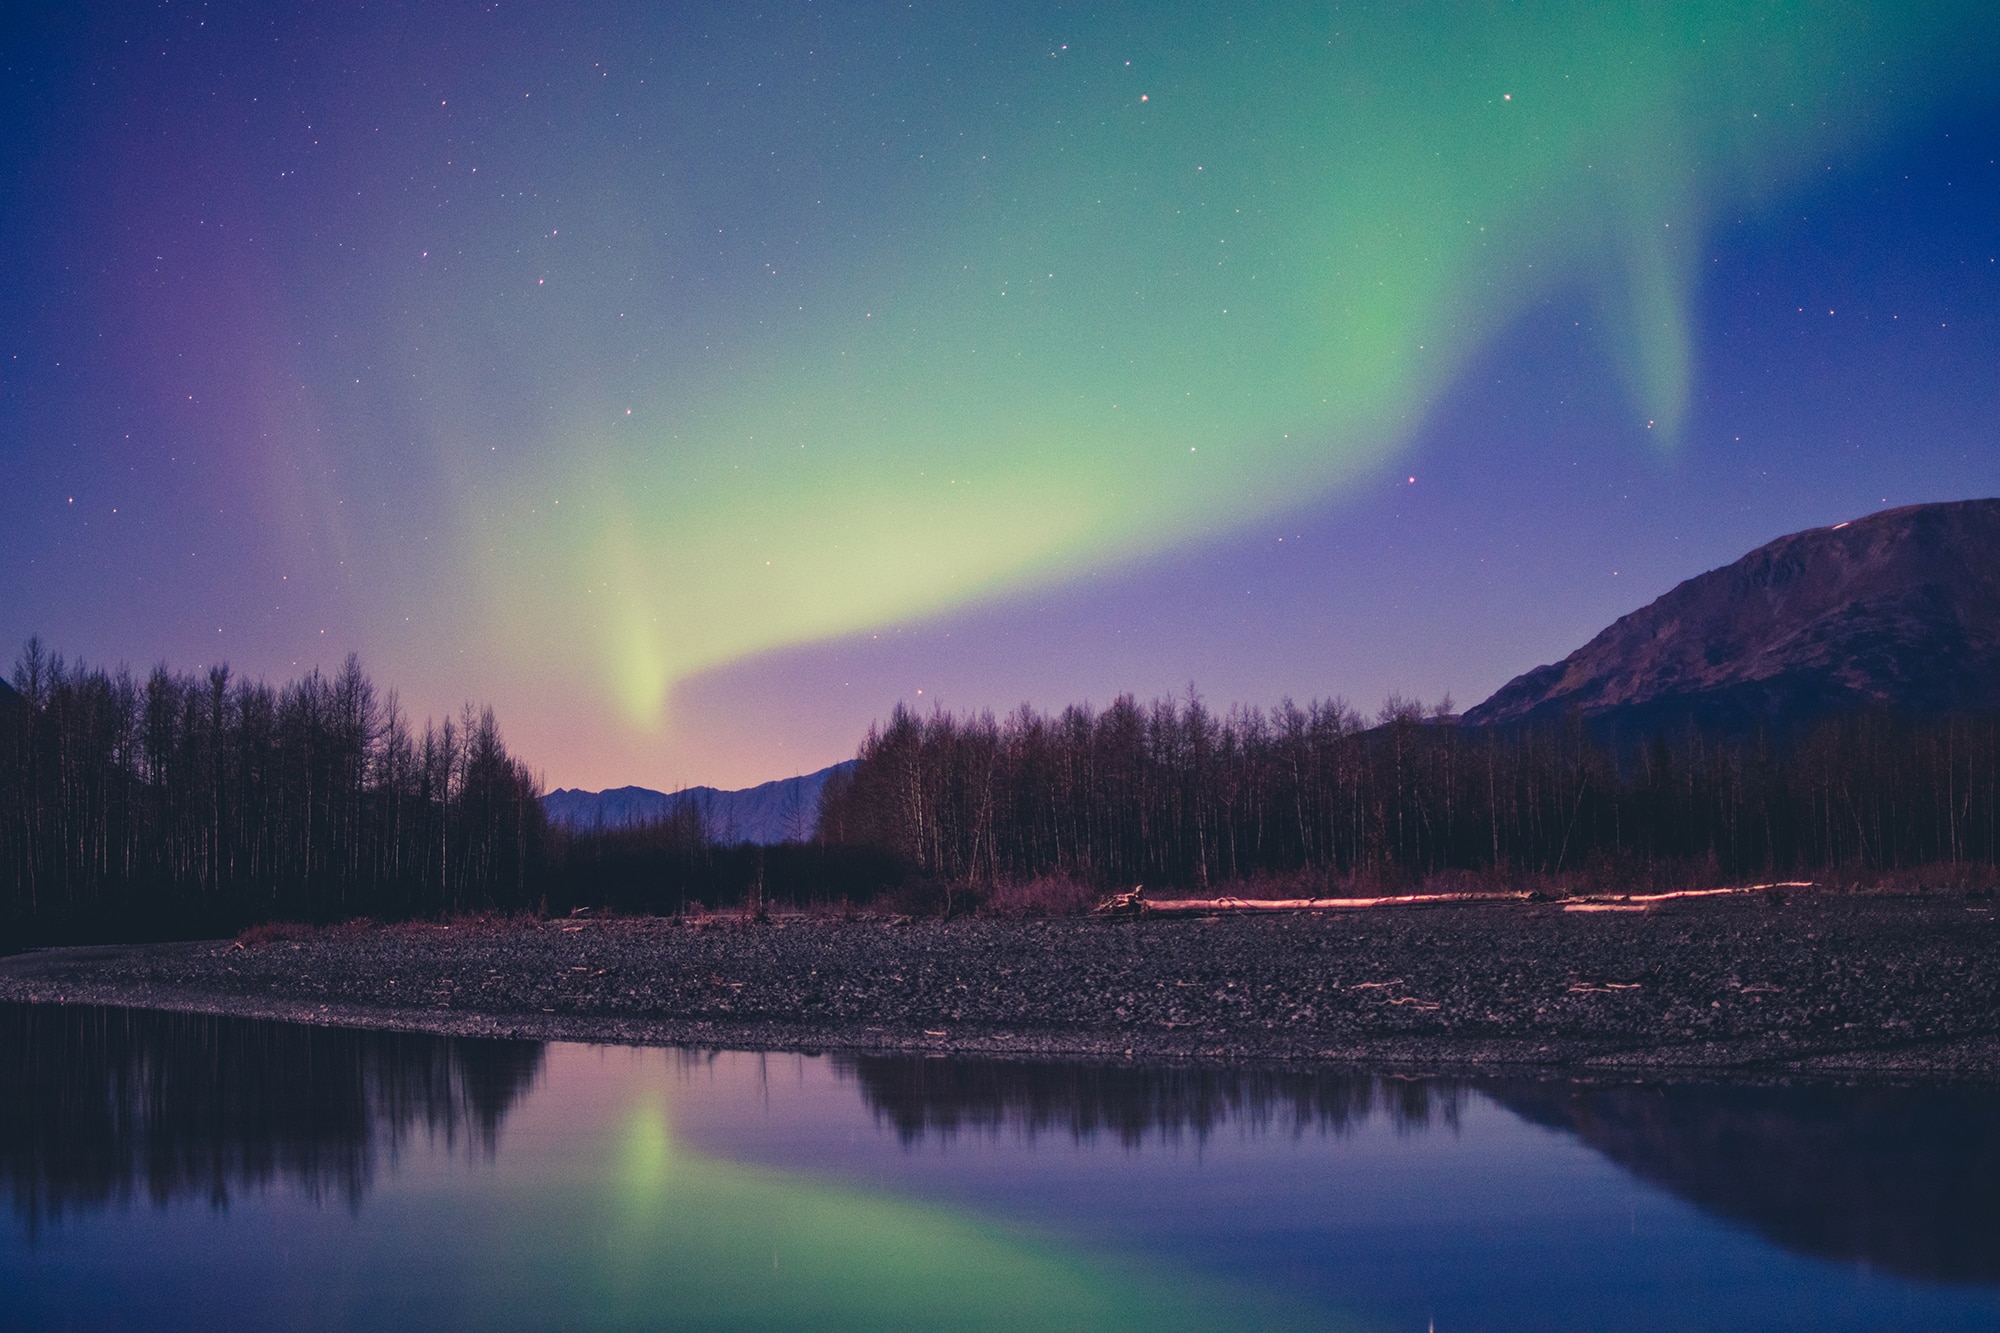 Anchorage has blossomed into a unique group destination and an ideal spot to see the northern lights